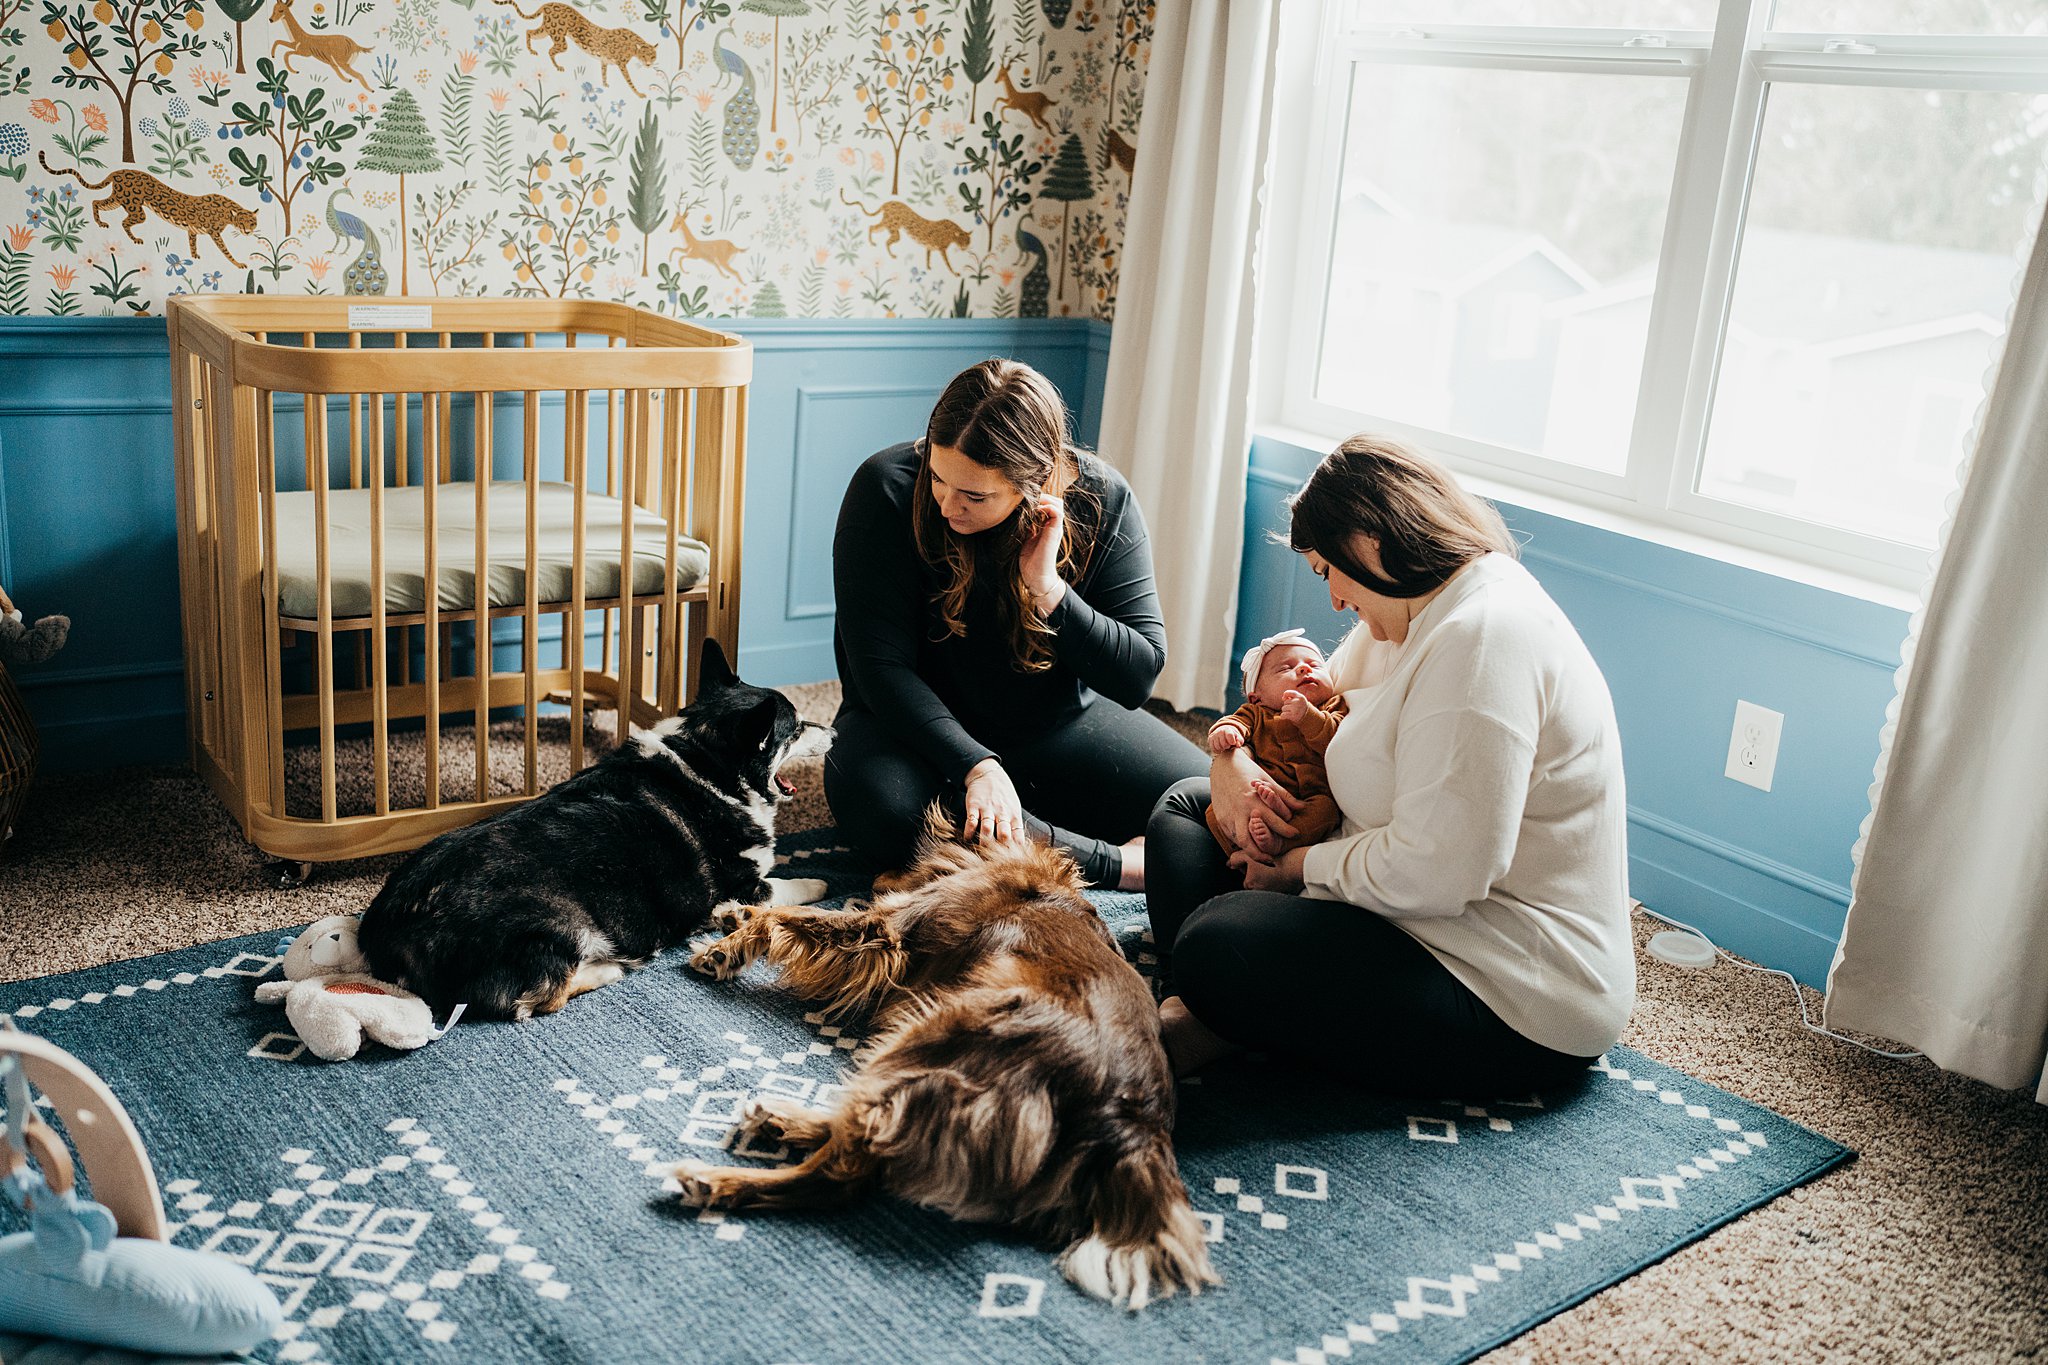 New moms sit on the floor of their nursery while playing with their two dogs and their newborn baby center for women's health at evergreen